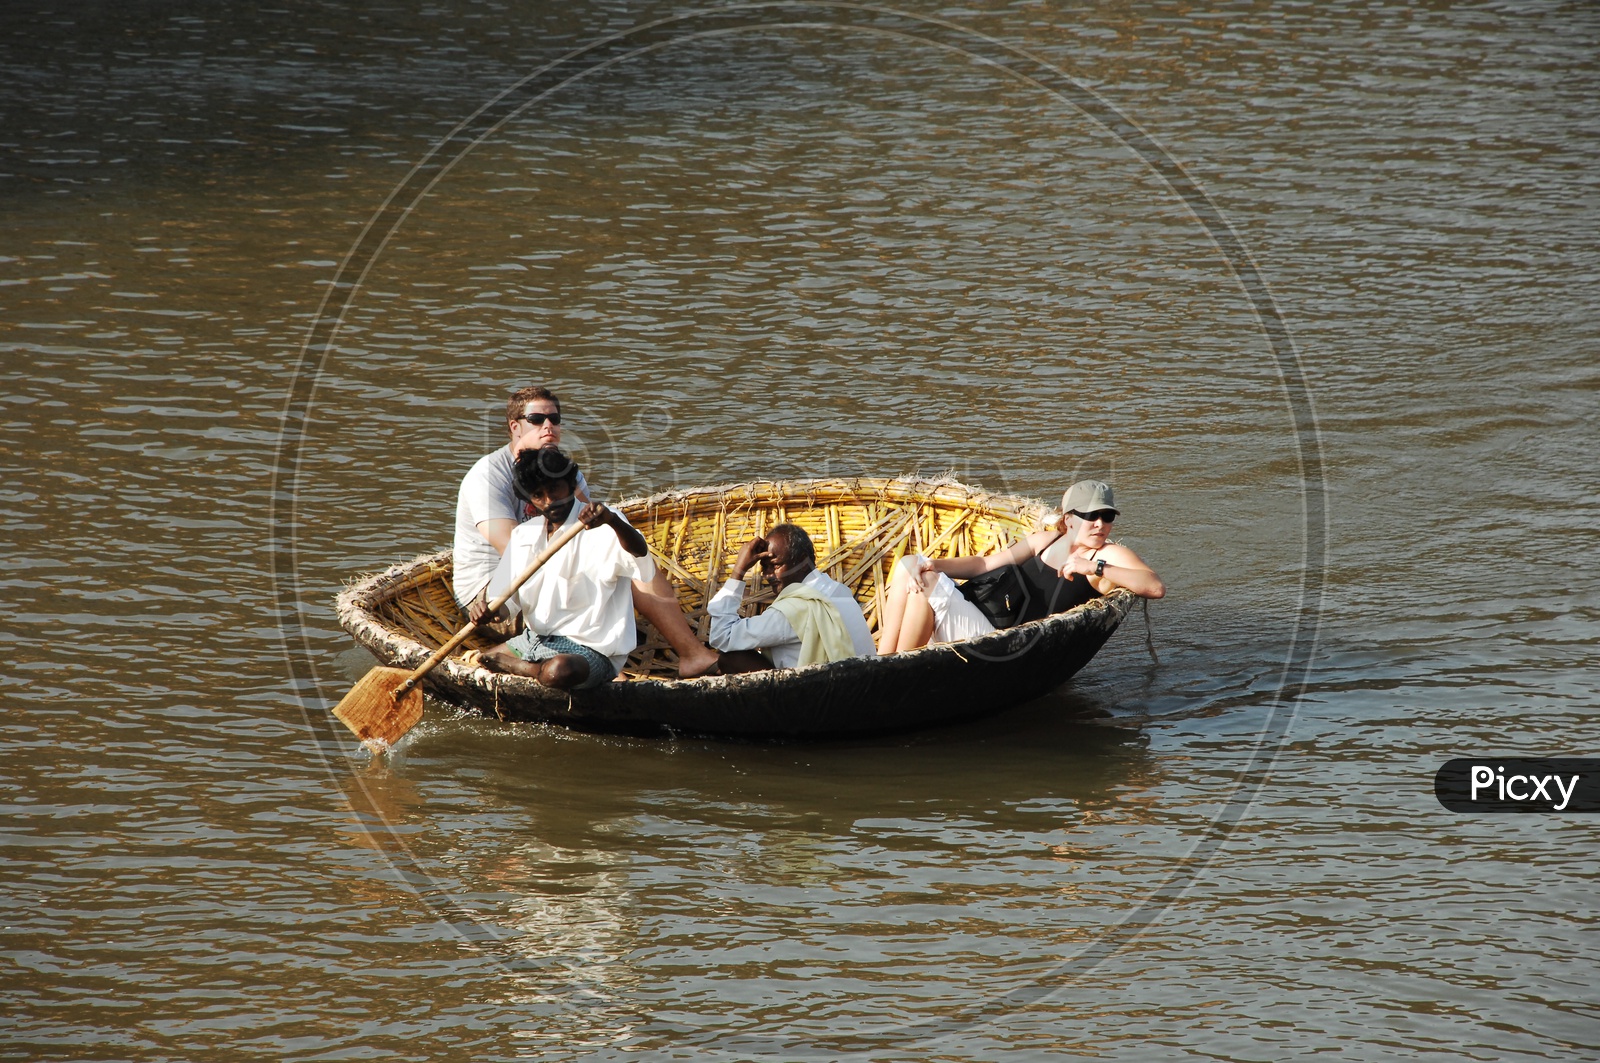 Foreigners On a Indian Coracle Boat